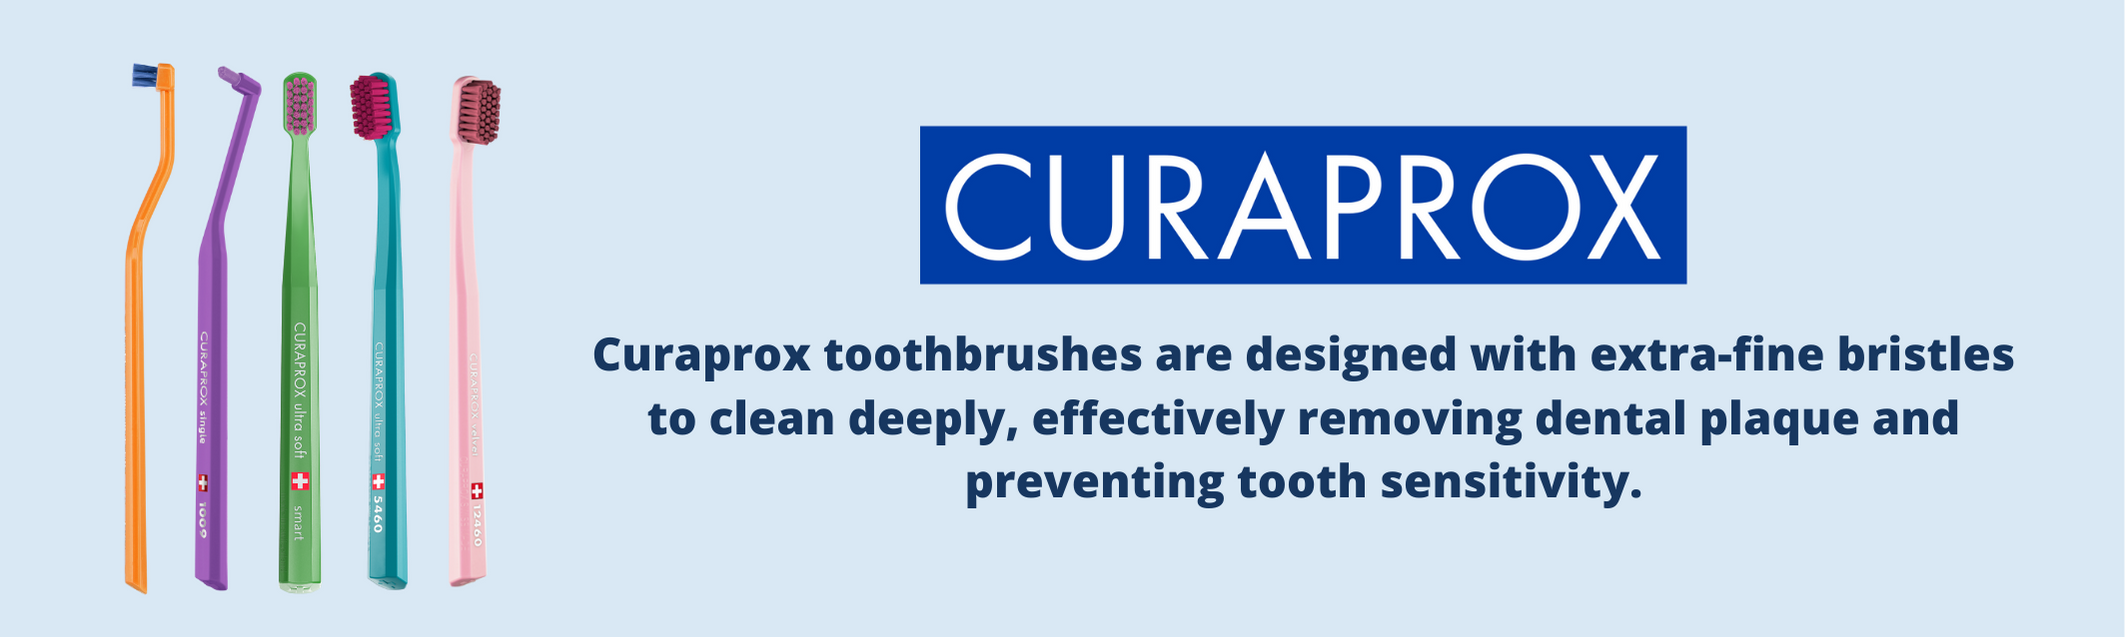 curaprox-toothbrushes